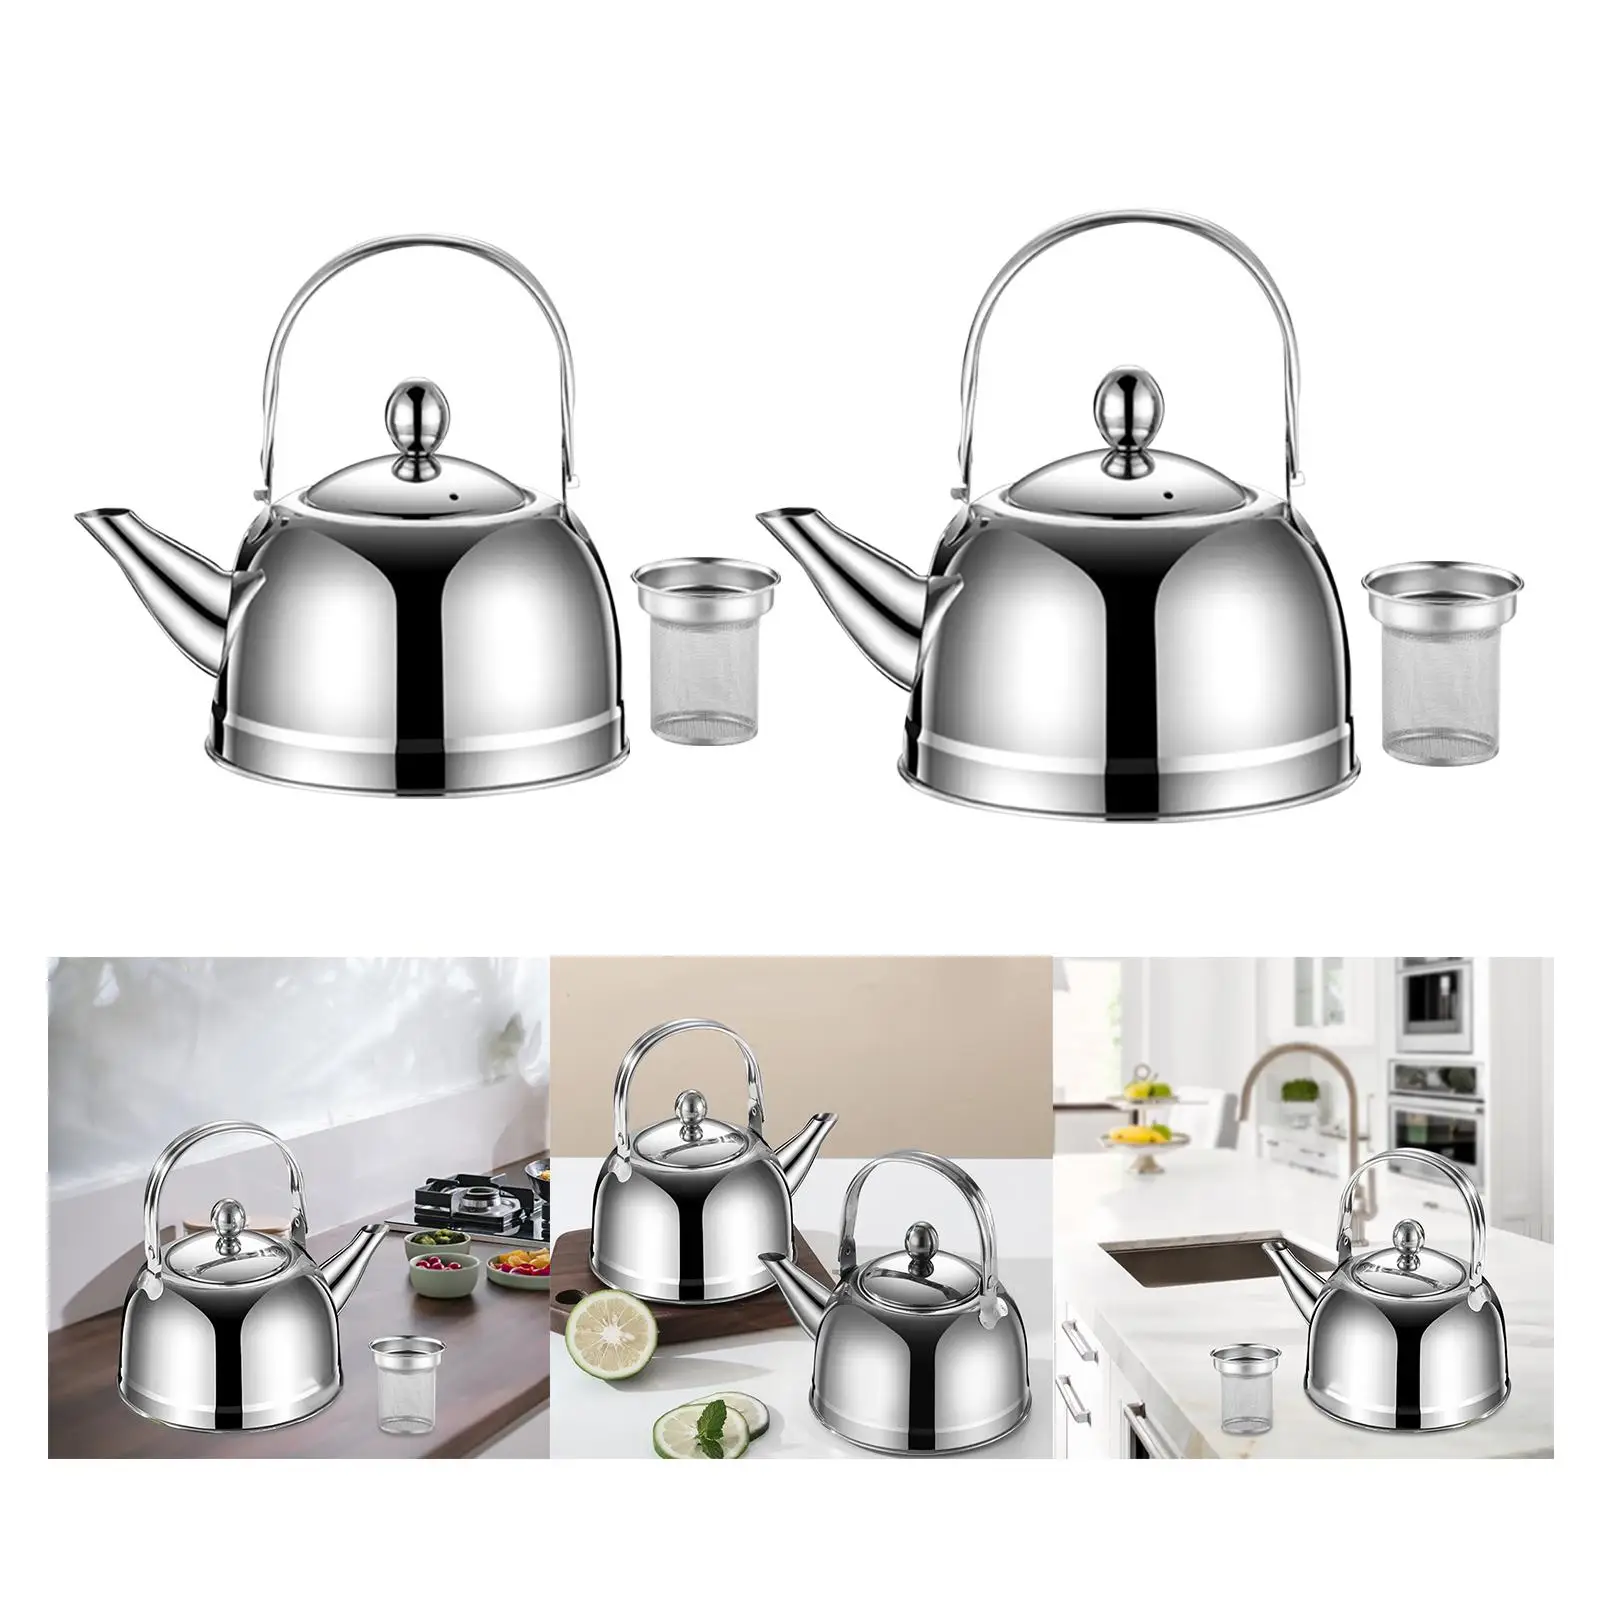 Portable Tea Kettle with Removable Infuser Teapots Water Pot Large Capacity for Picnic Hiking Restaurant